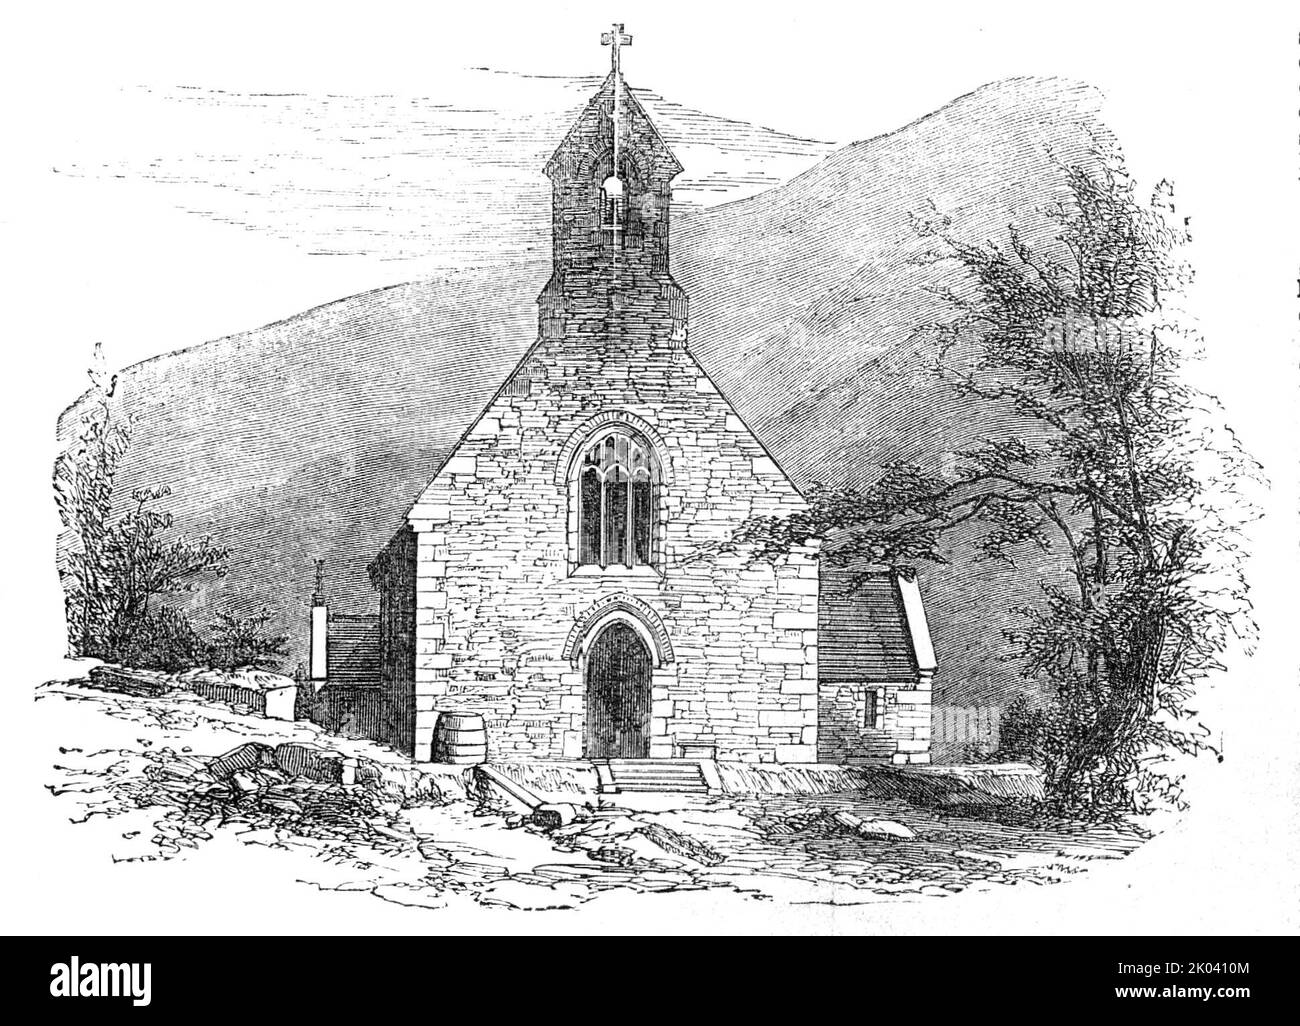 New Church, built by Sir Benjamin Hall, at Abercarn, South Wales, 1854. Church provided '...for the sole use of the native Cymri...The edifice is built of the fine stone of the locality...The sculpture of the stone corbels and mullions of the windows is very fine, but devoid of all fantastic ornaments...the style is the simple, solid architecture of the oldest ecclesiastical edifices in Wales, with a belfry, but no tower...The whole proceedings were arranged with the strictest attention to the benefit of the Welsh people, by the establishment of a commodious Church, where they can be certain o Stock Photo